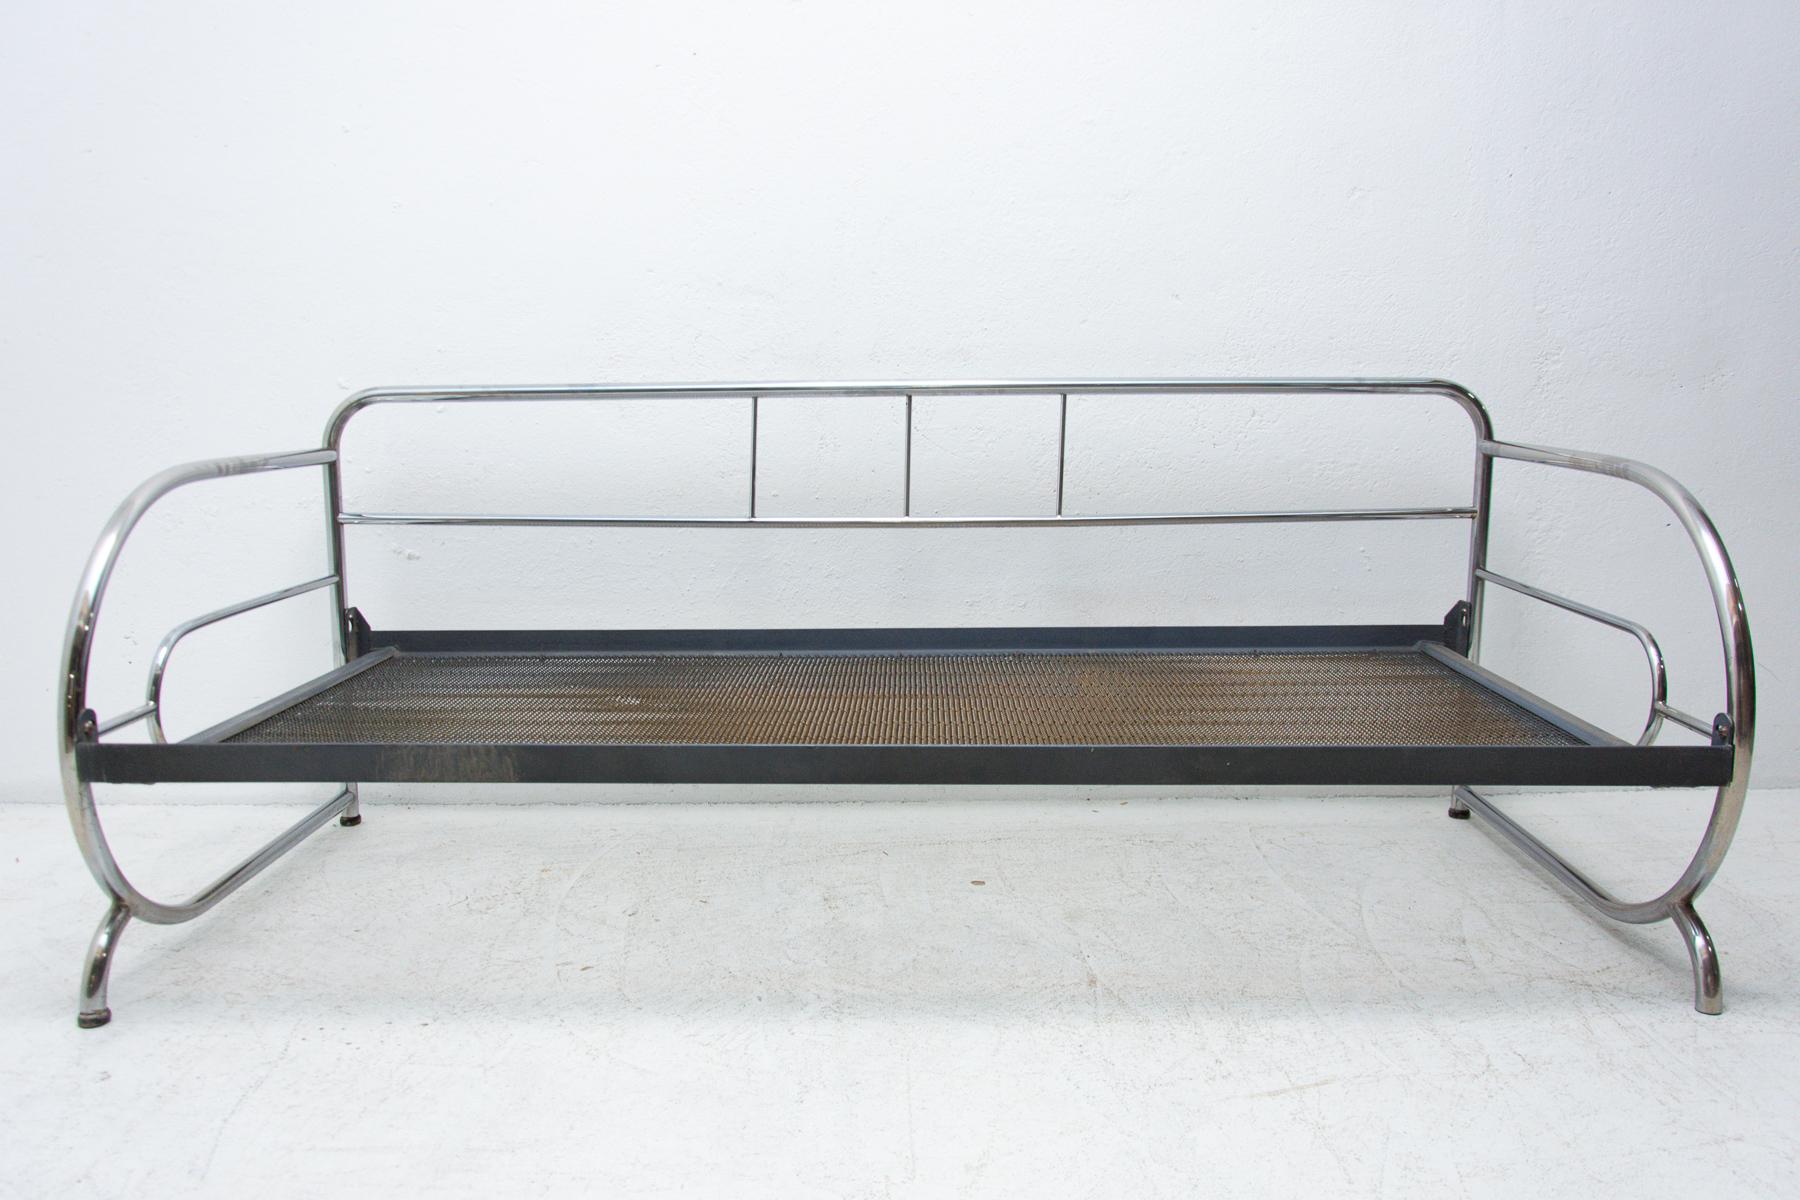 Chromed, tubular steel sofa from the Bauhaus period, 1930s, Bohemia. It was made by Robert Slezák company. Chrome is in very good vintage condition without damage and rust. Wear consistent with age and use.
   